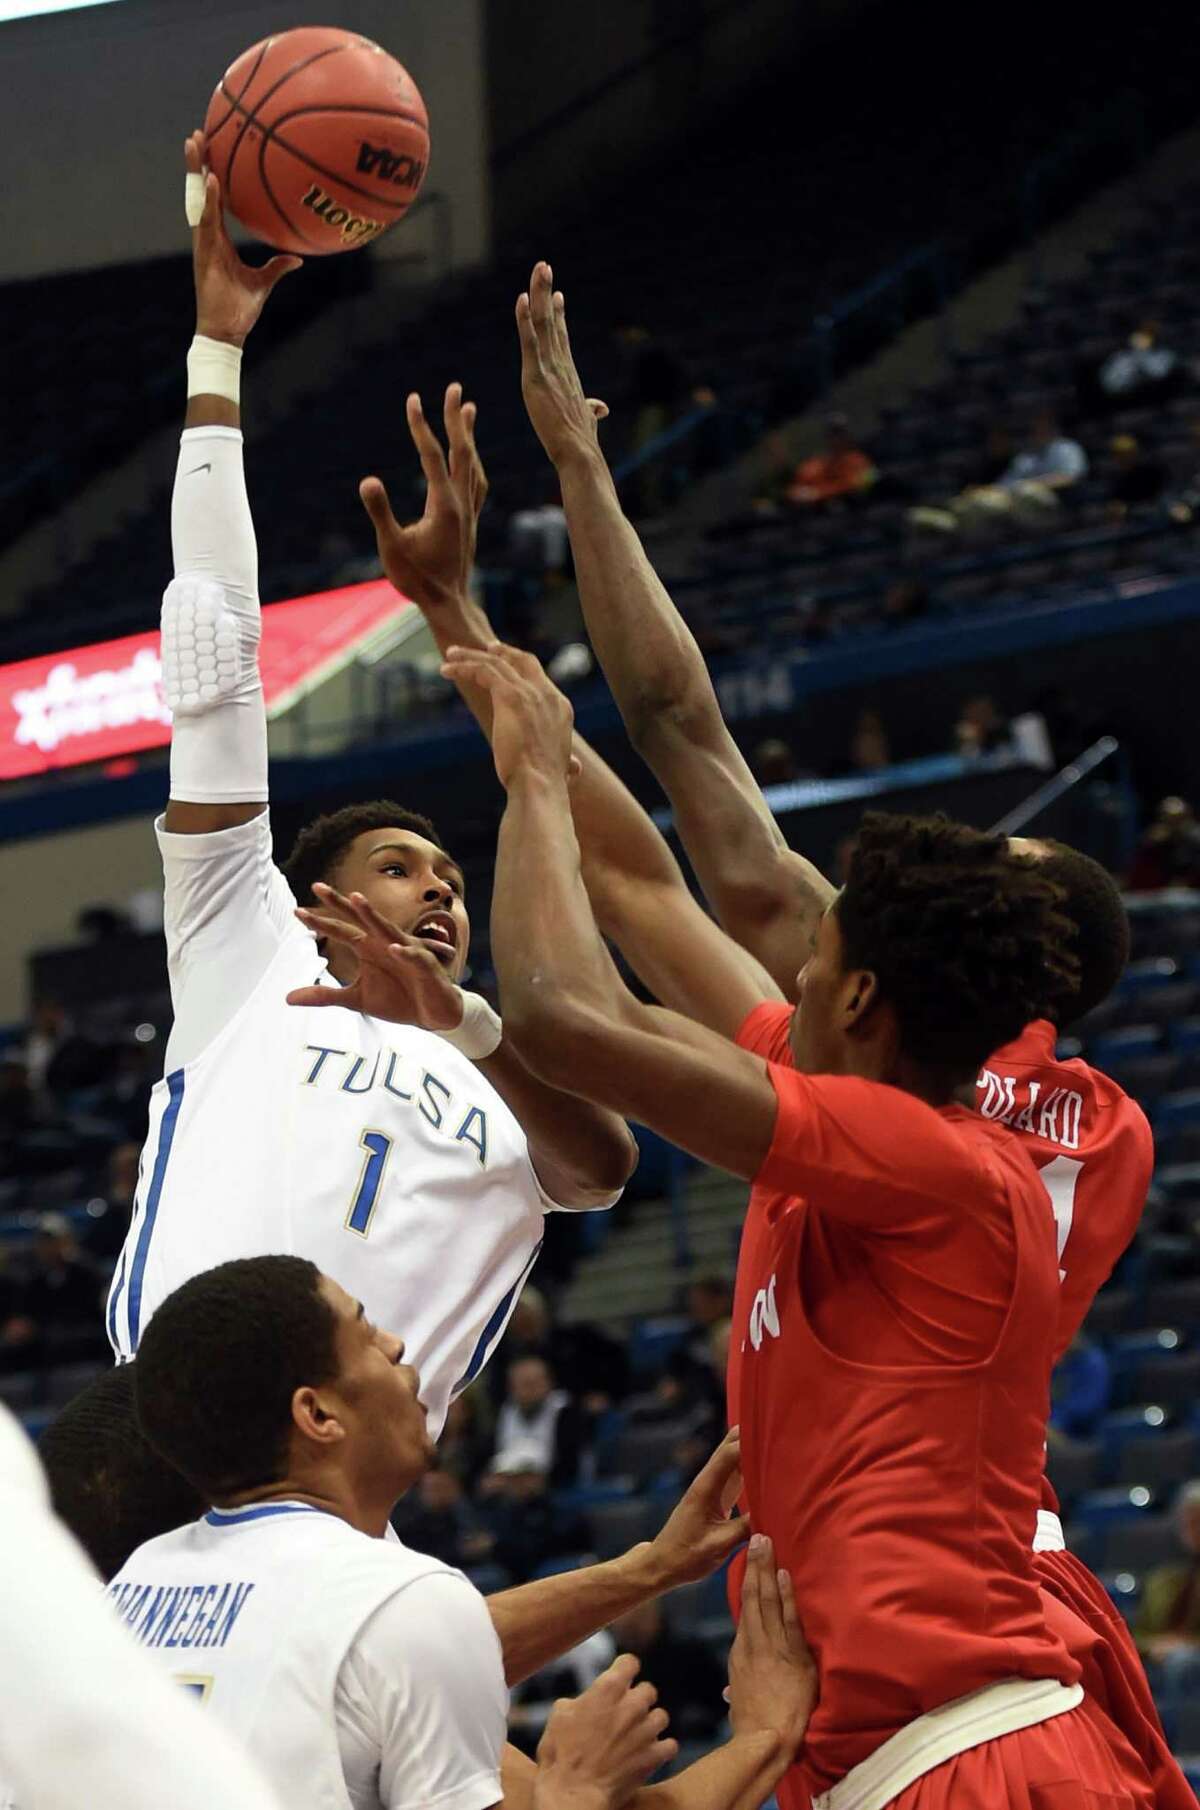 Tulsa's Rashad Smith (1) shoots in the lane against Houston in the first half during the quarterfinals of the AAC Tournament at the XL Center in Hartford, Conn., on Friday, March 13, 2015. Tulsa advanced, 59-51. (Stephen Dunn/Hartford Courant/TNS)